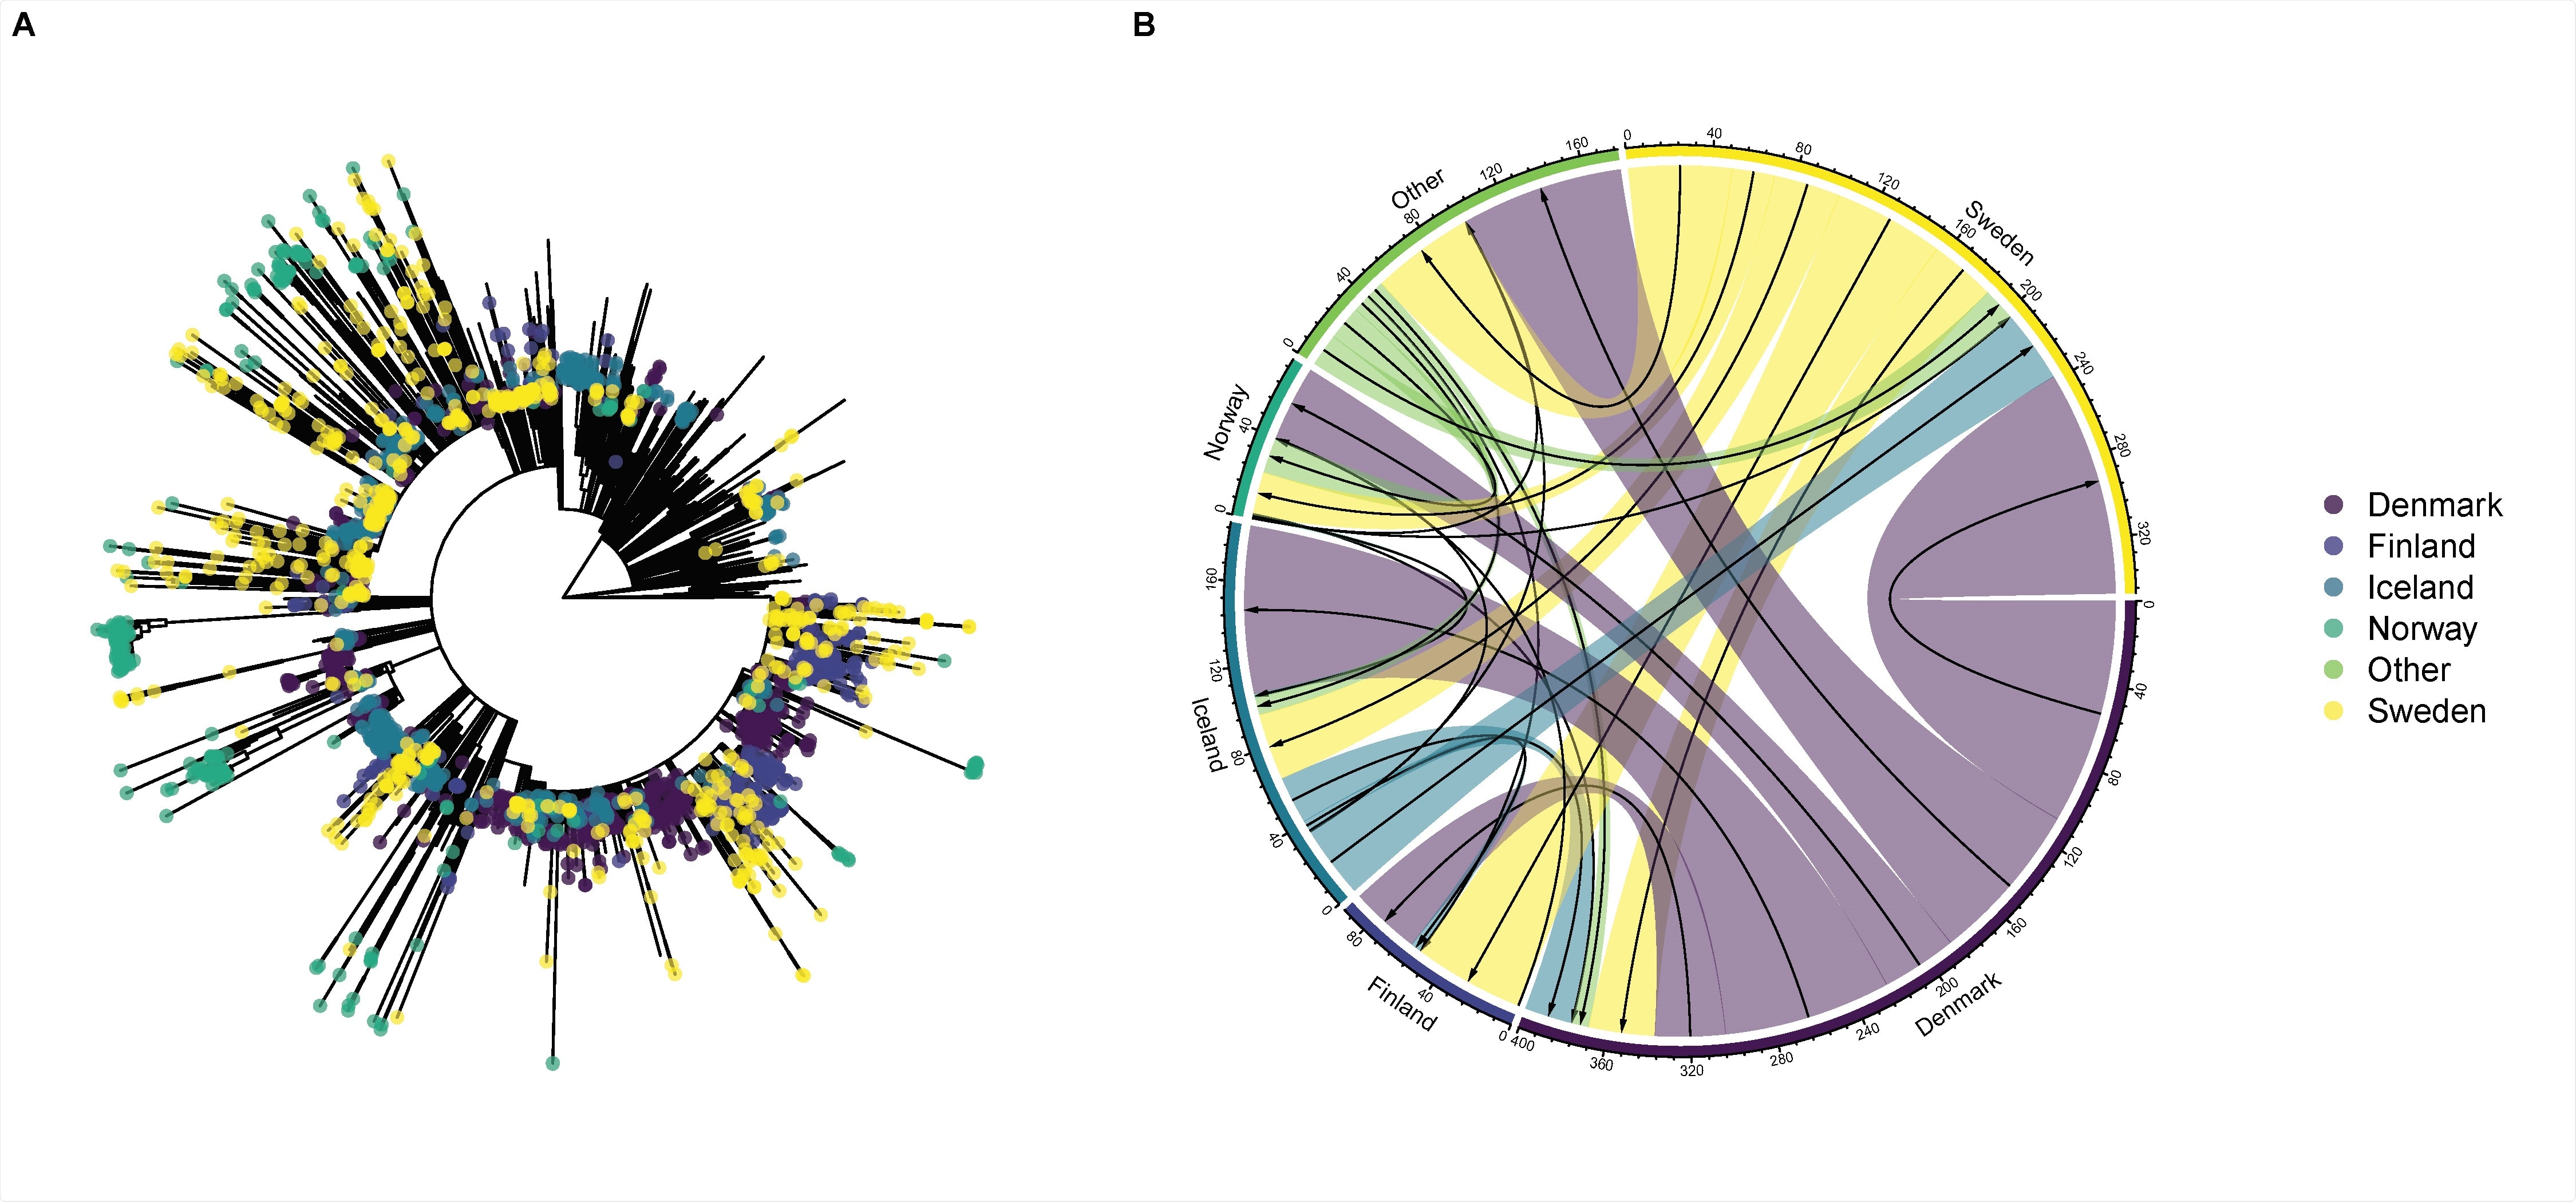 Phylogenetic tree of SARS-CoV-2 from Nordic countries as well as global genetic diversity. The tips are coloured according each Nordic country (panel A). Circular migration diagram of migration events between the five Nordic countries and other locations. The size of the coloured arrows denotes the posterior mean number of inferred migration events from the Bayesian phylogeographic analysis. The black arrows represent the migration direction (Panel B).